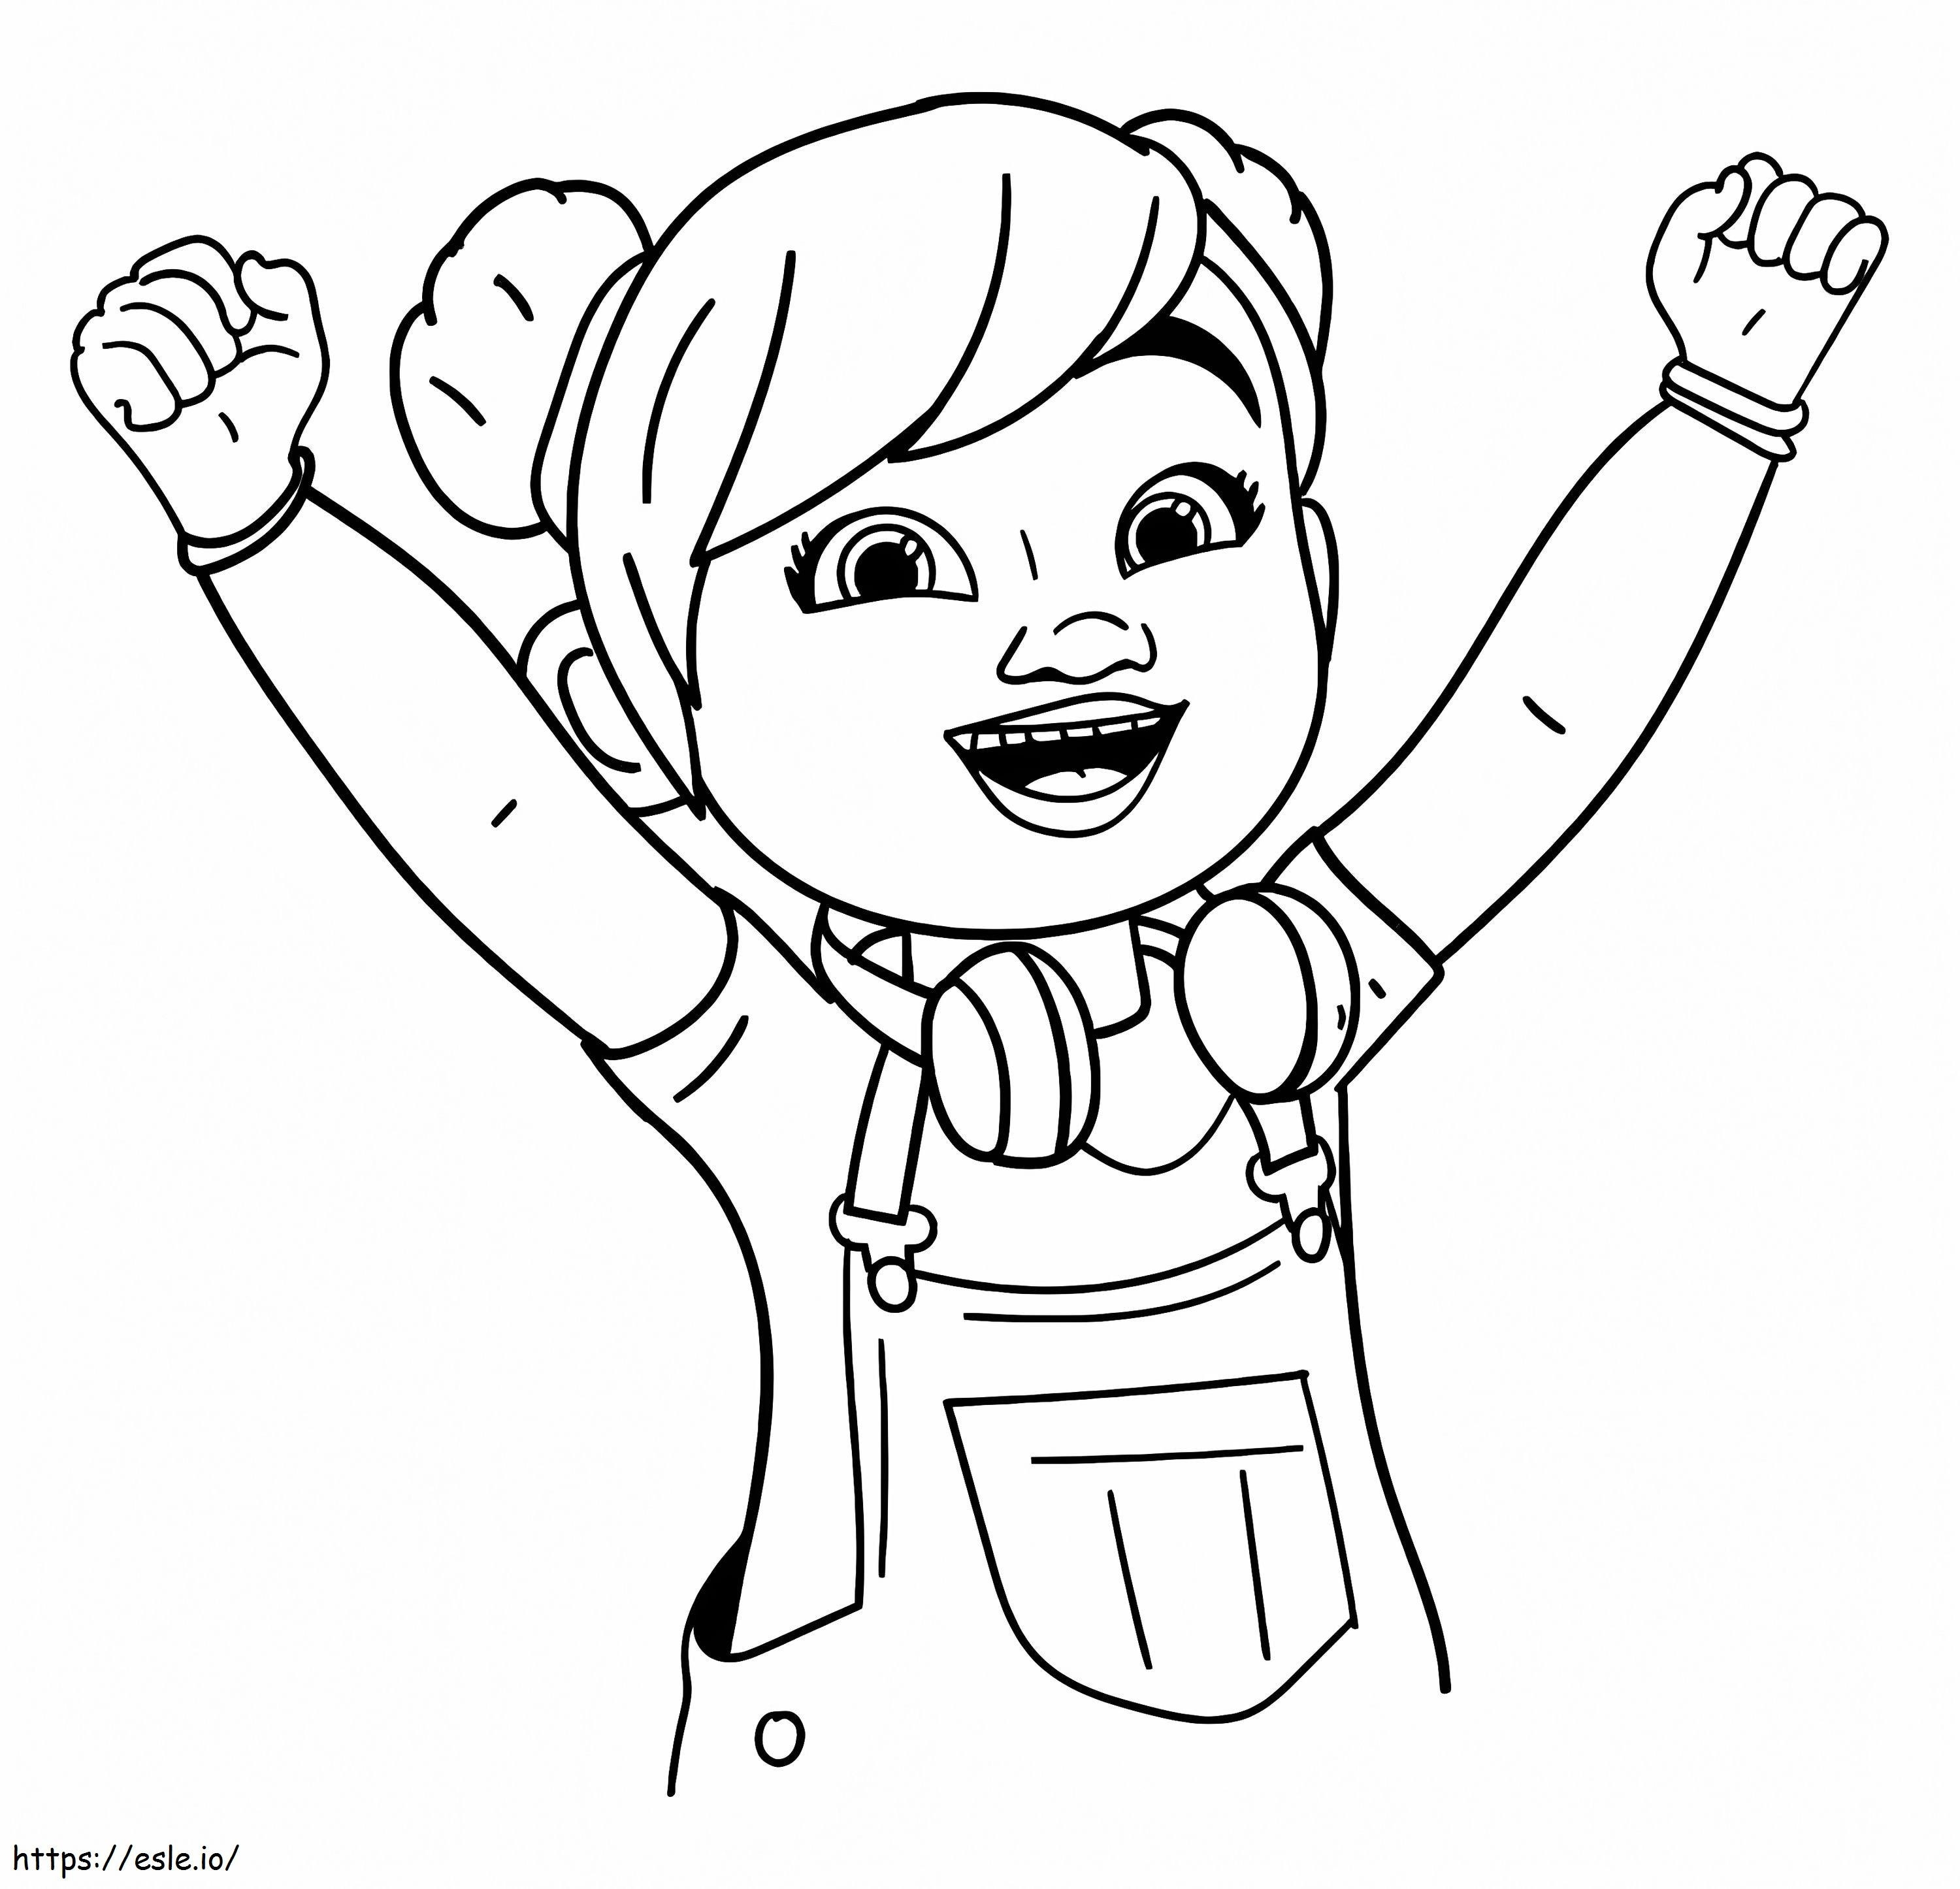 Switch Stein From Karmas World coloring page